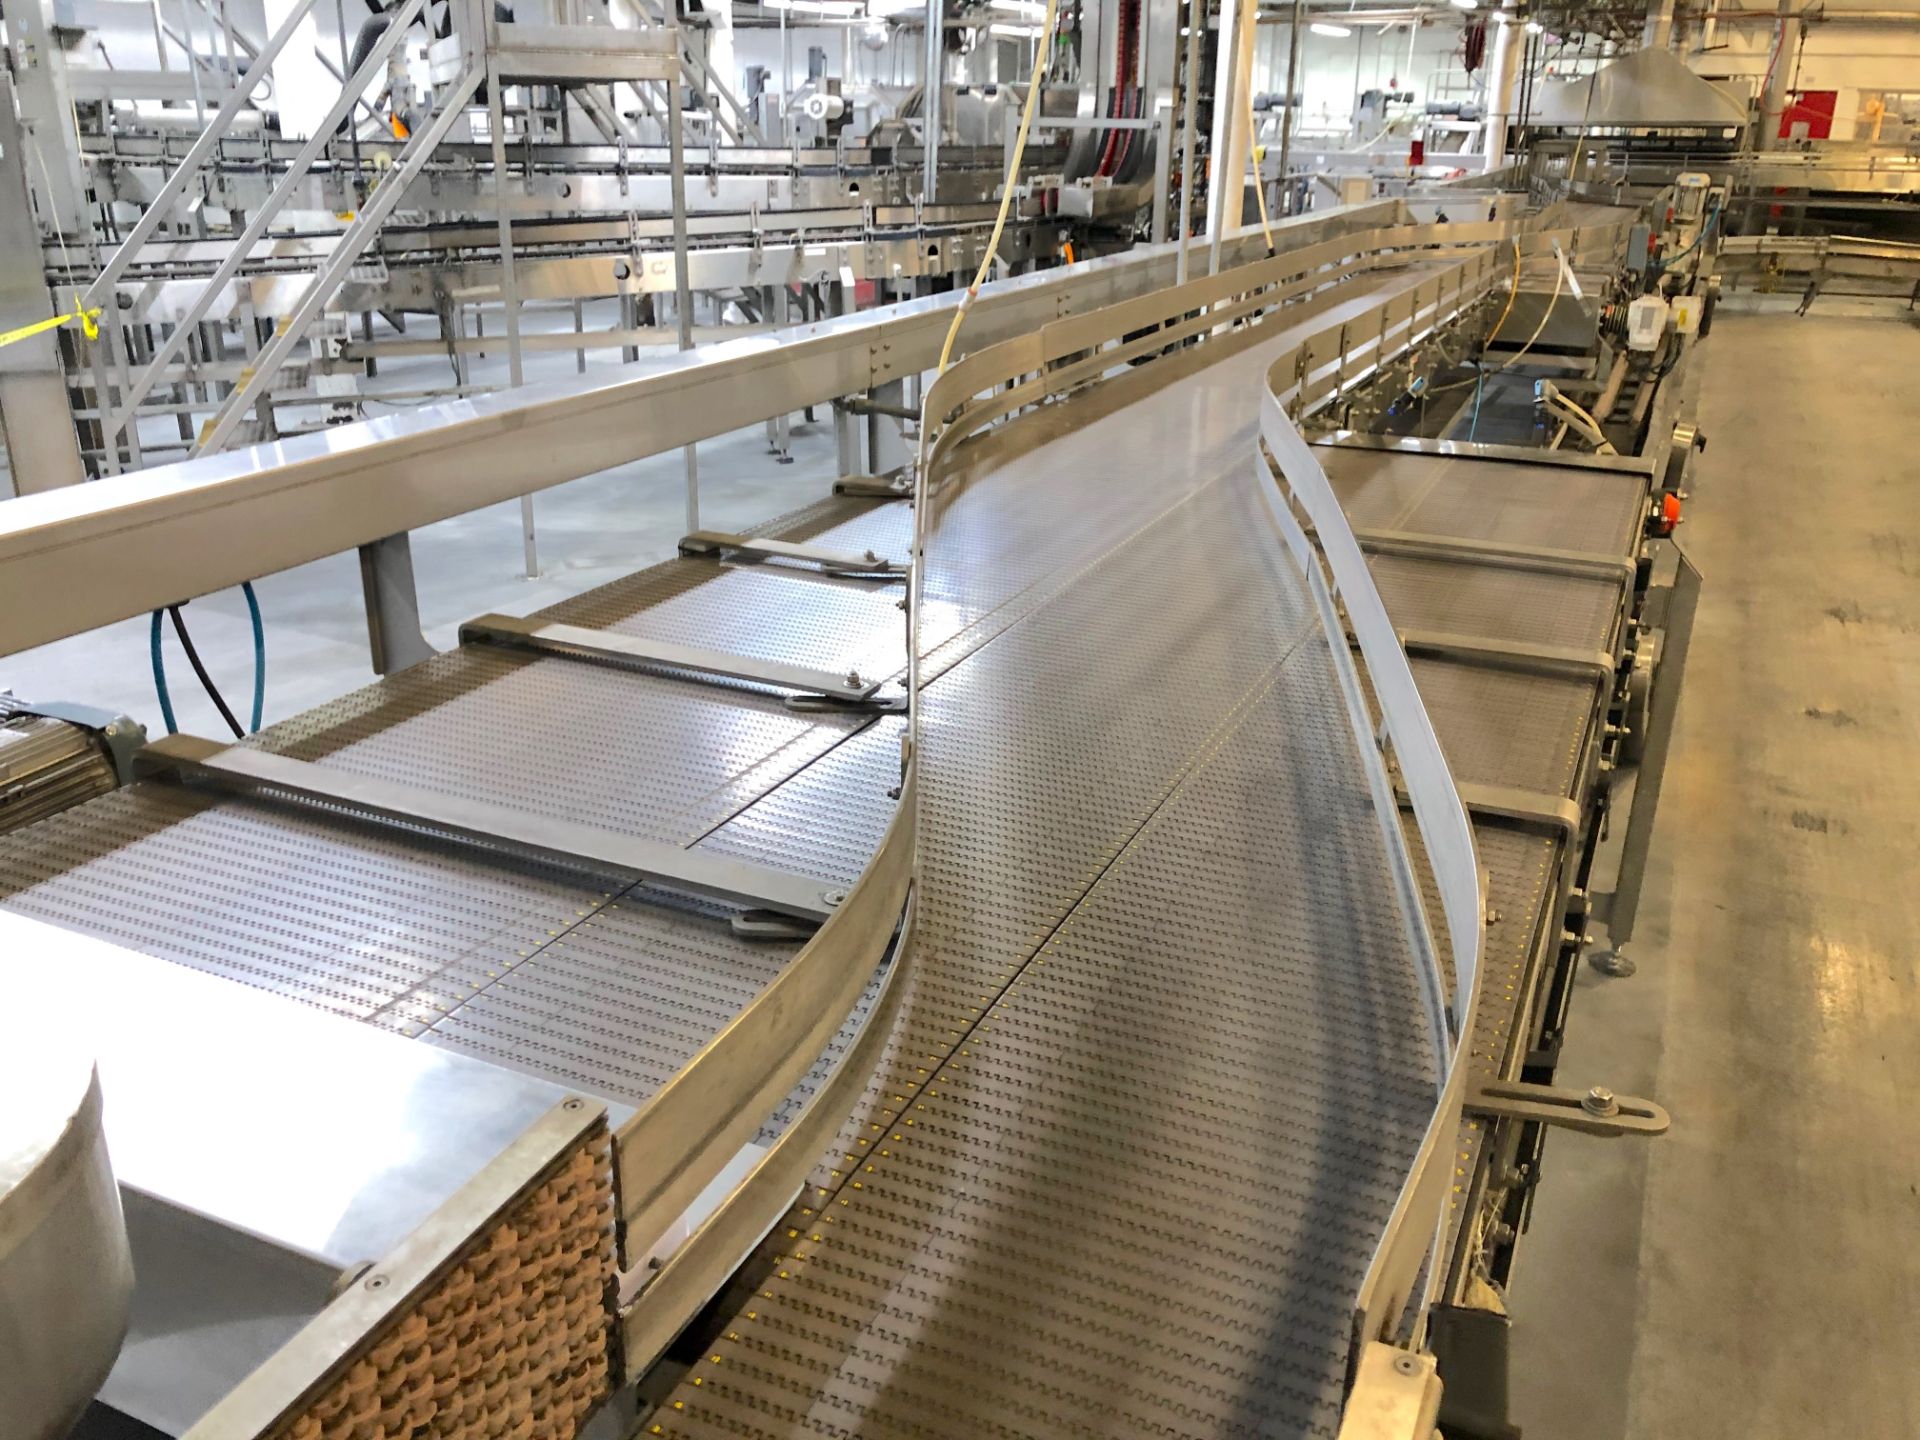 Discharge Conveyor from Labelers - Image 14 of 23